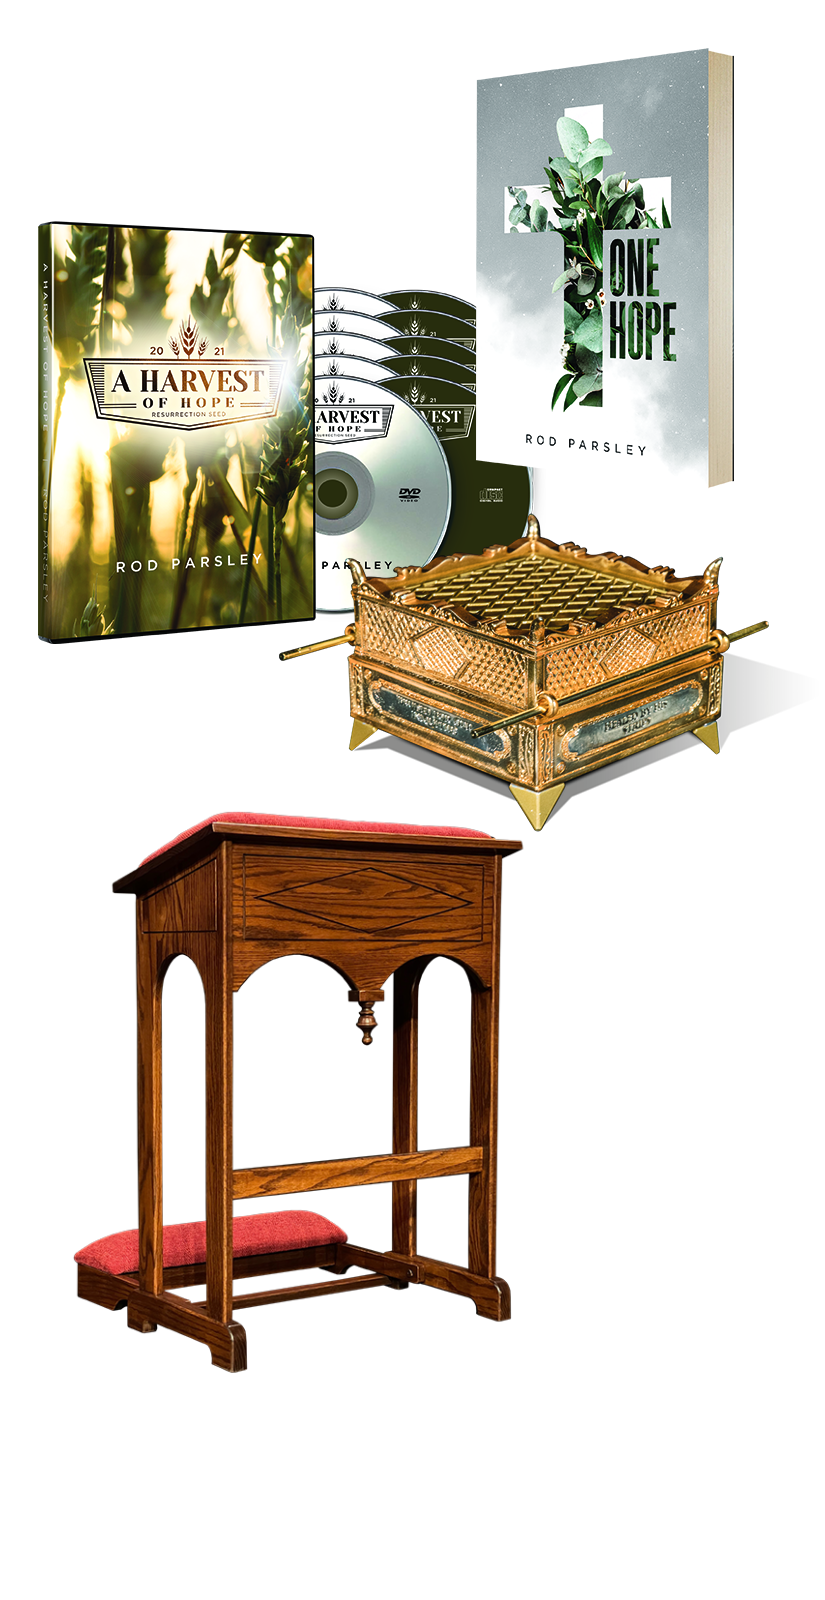 One Hope Book, Brazen Alter Mini-Replica with Inscription, A Harvest of Hope 10 Disc Message Series, and Replica Prayer Bench